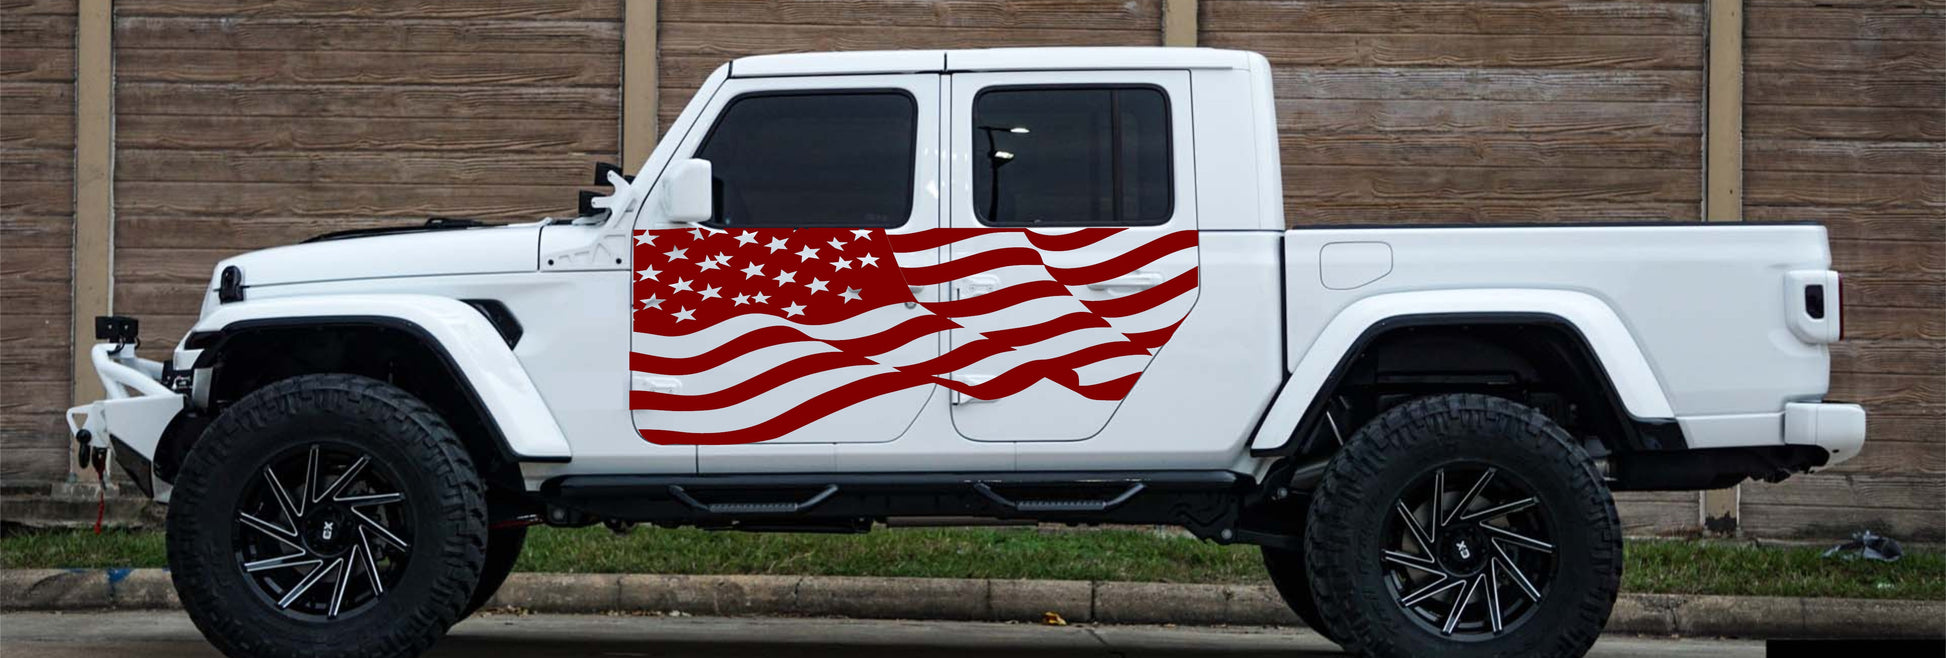 American Flag Decal Fits Jeep Gladiator's Doors